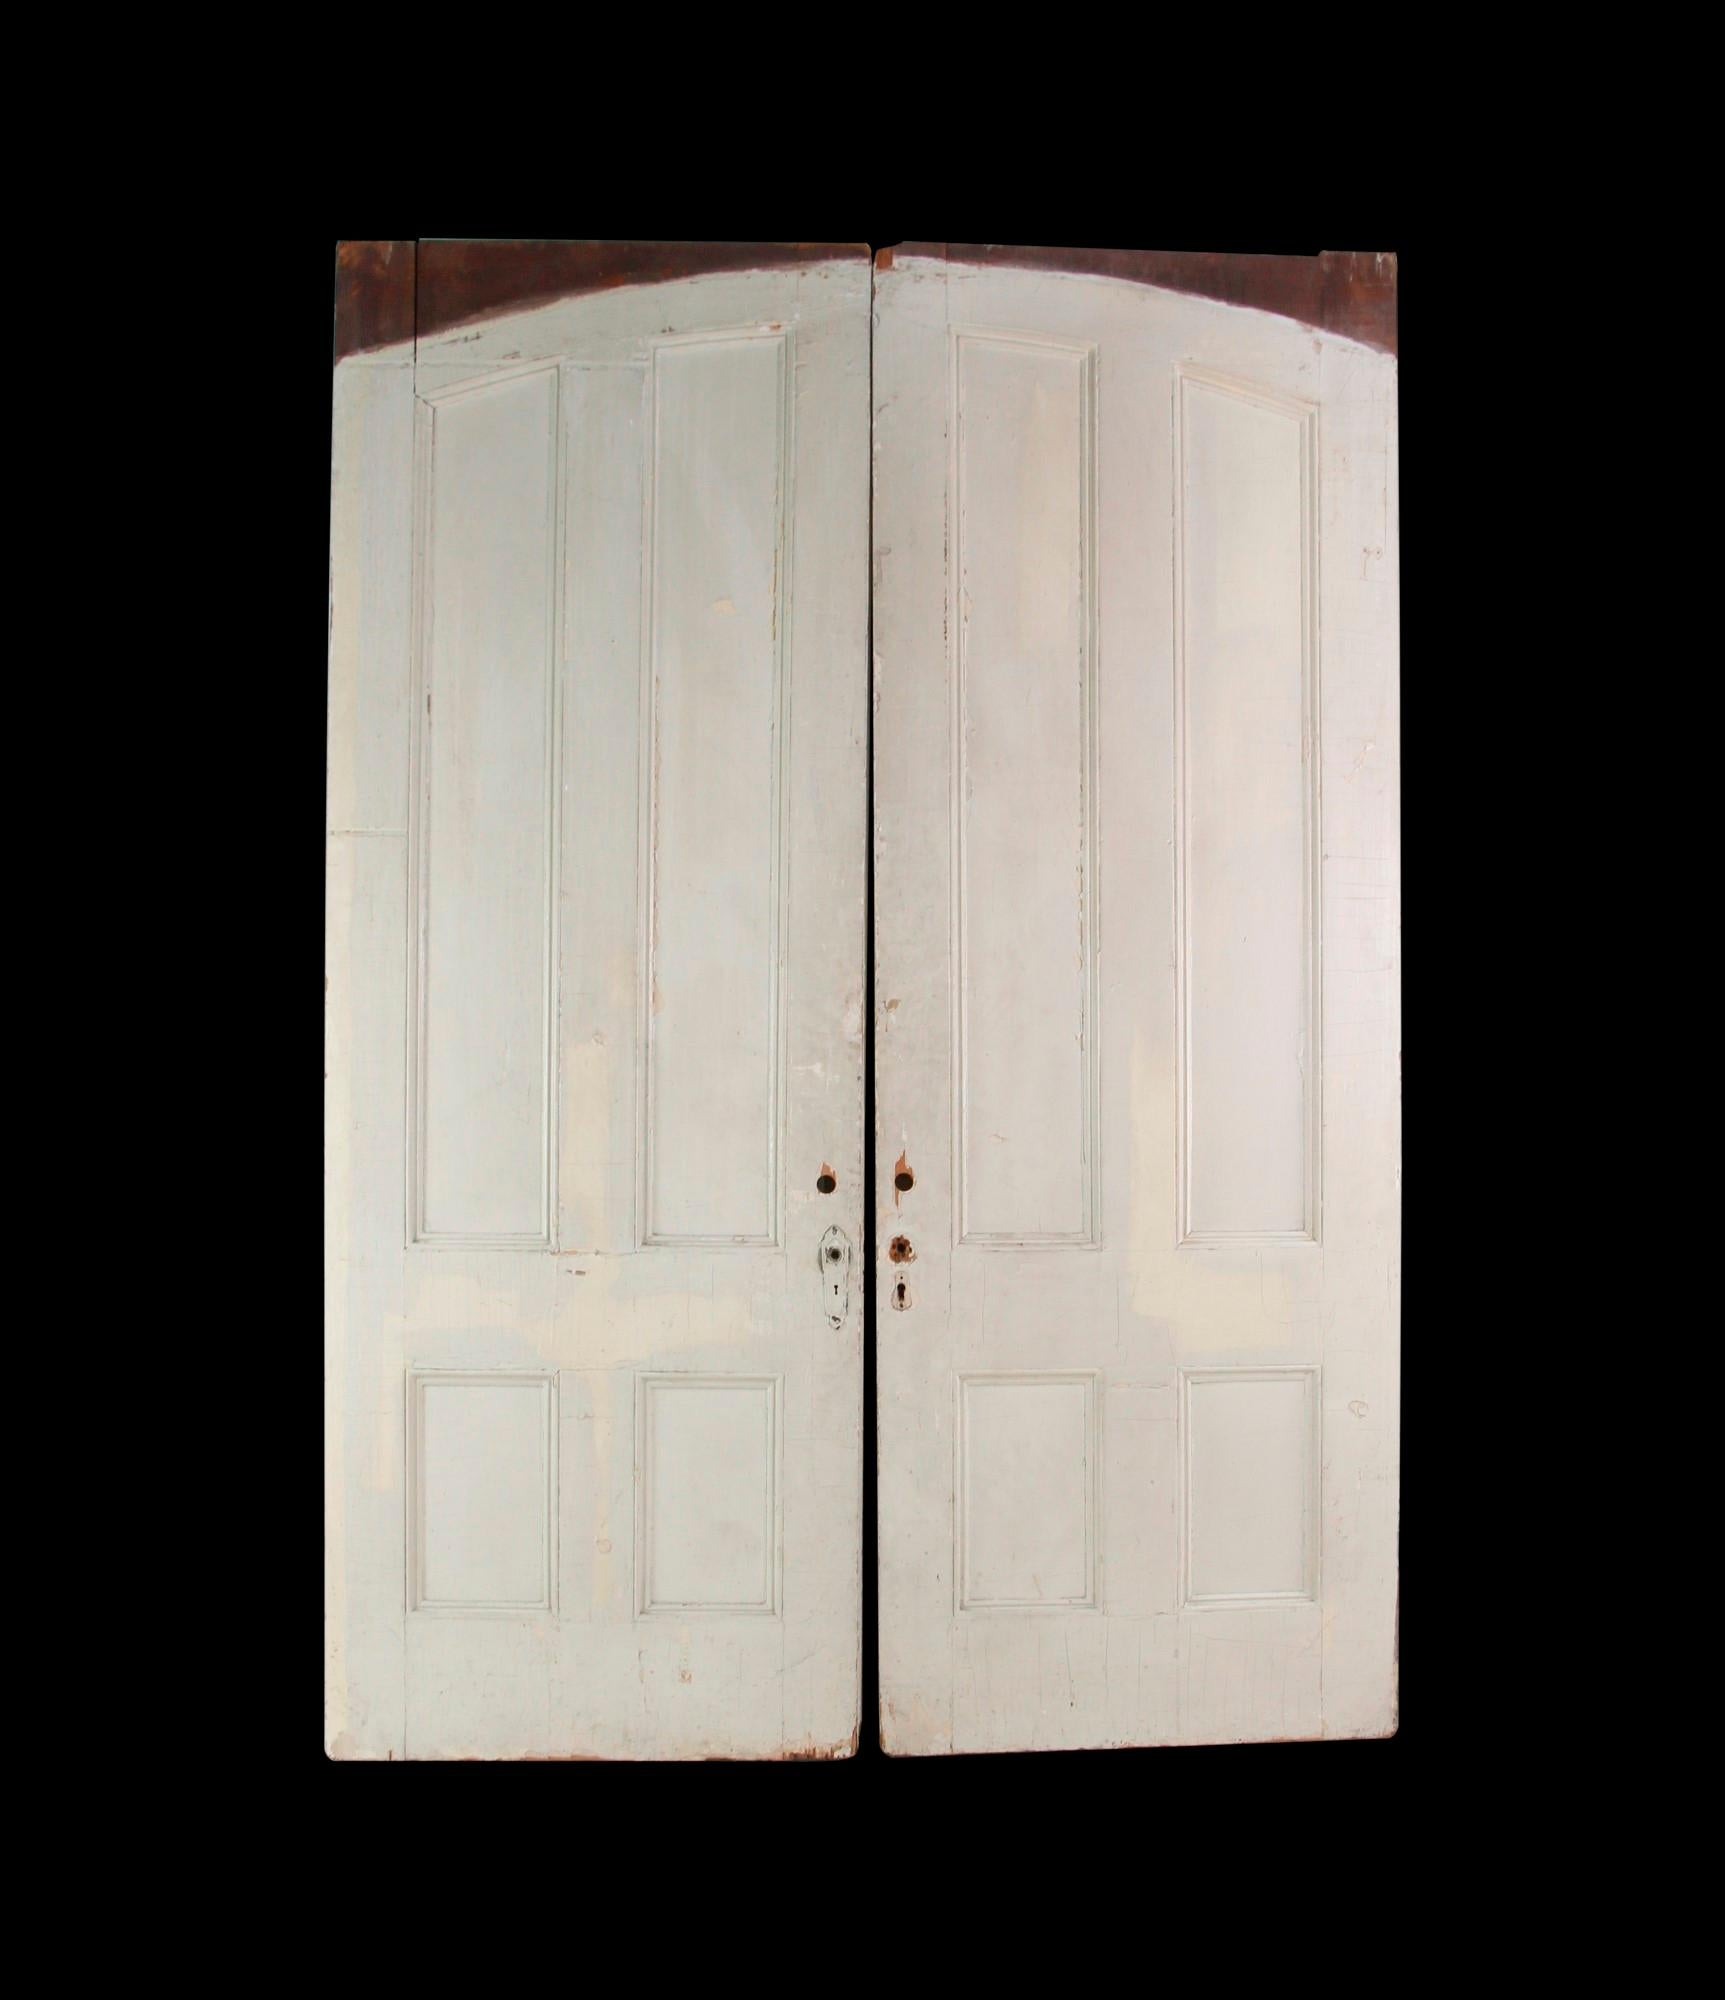 Set of Antique 4 Pane Wood Pocket Doors Painted White Vertical Panels In Good Condition For Sale In New York, NY